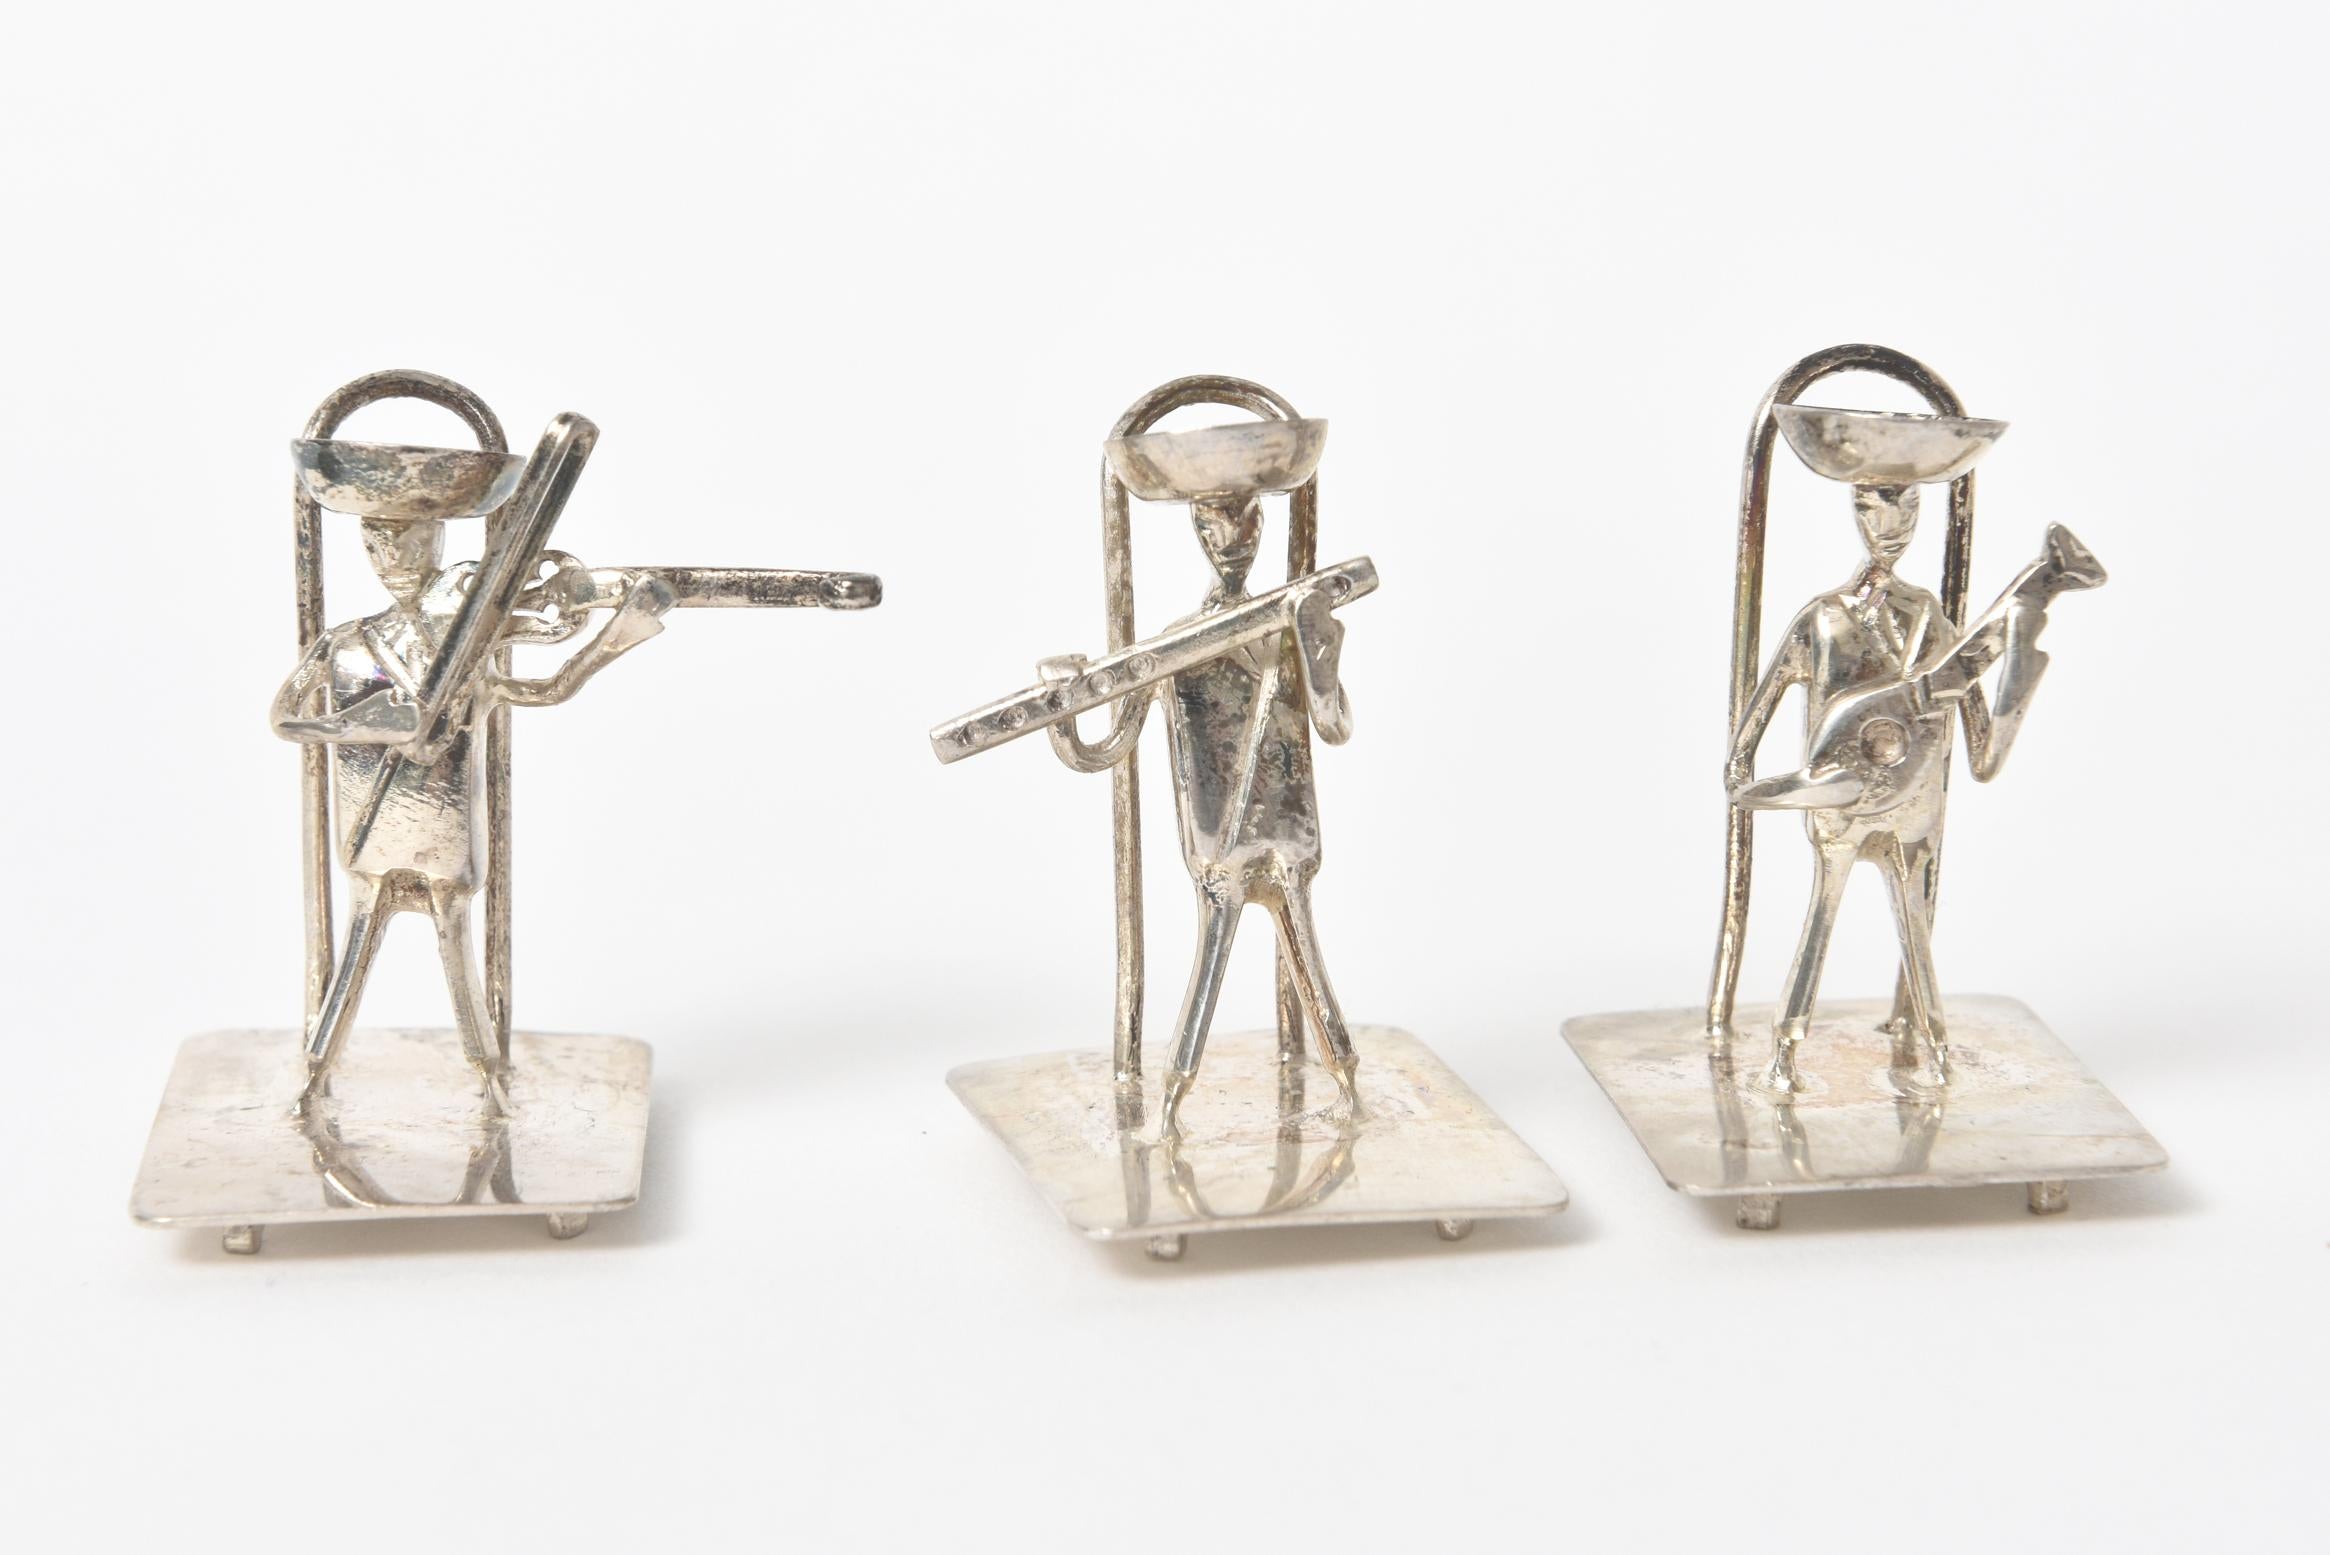 20th Century Silver Musician Mariachi Band Figural Place Card Holders Placecard Set of 10